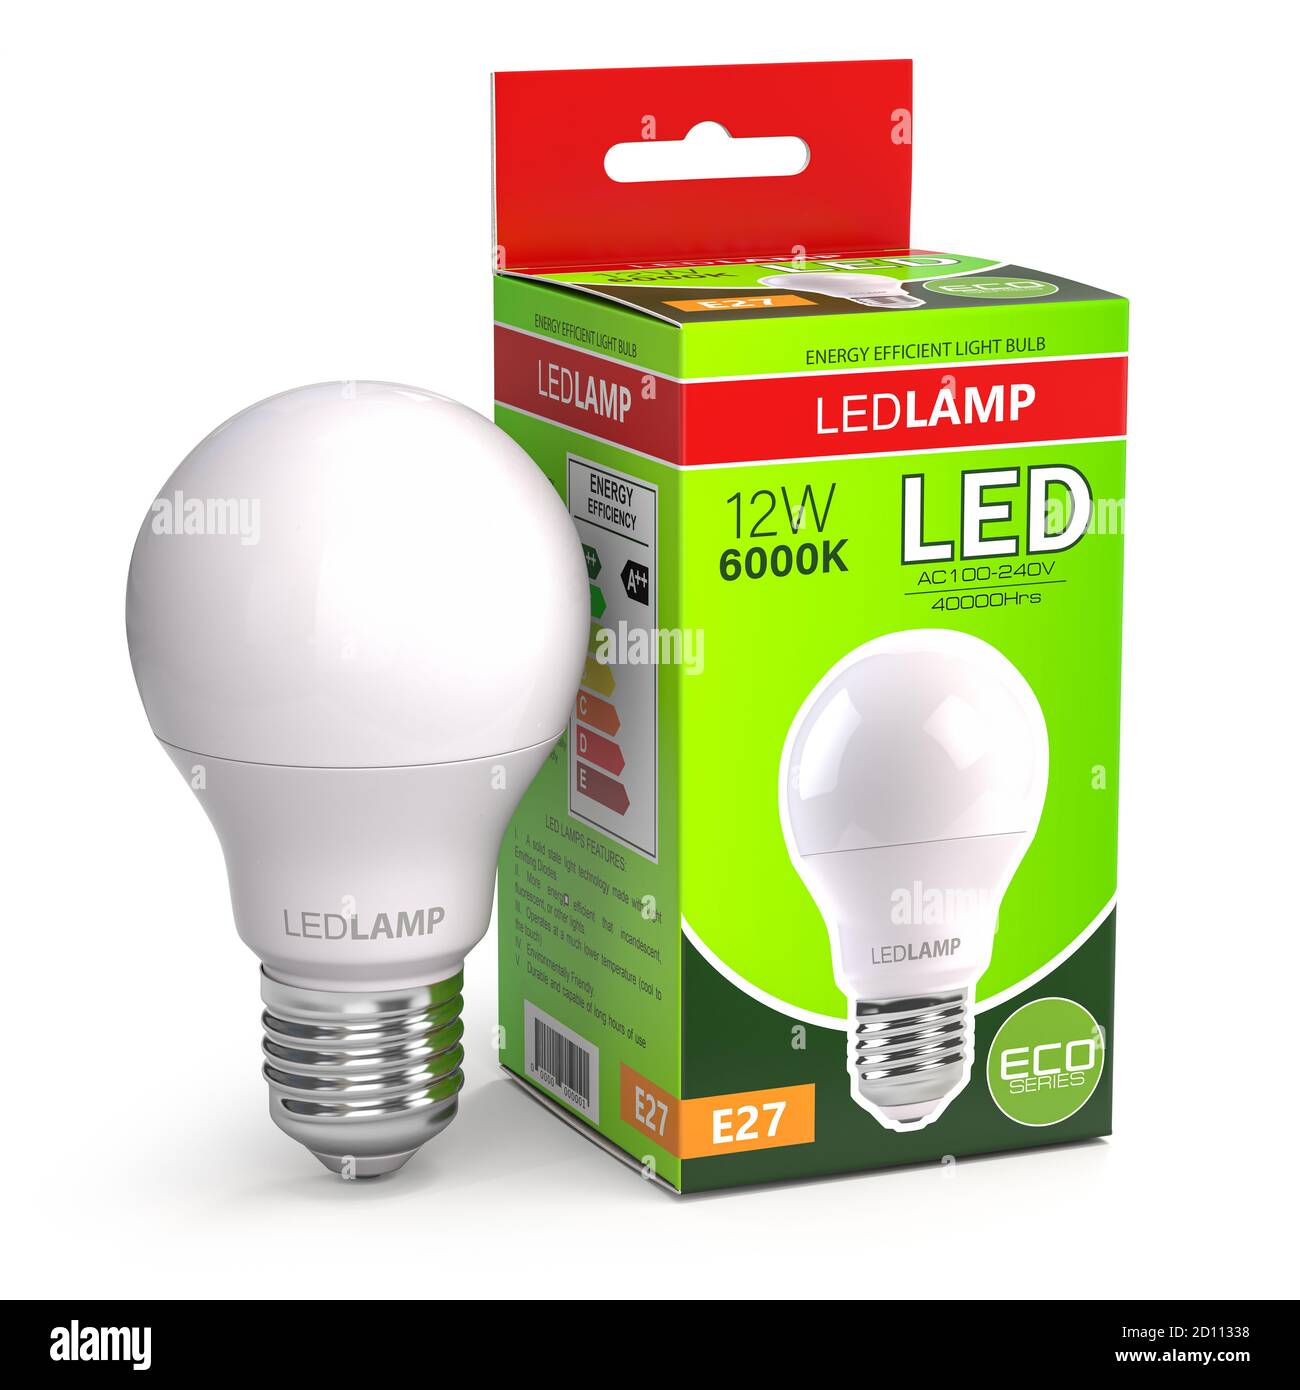 Led lamp with package box isolated on white. Energy efficient light bulb.  3d illustration Stock Photo - Alamy